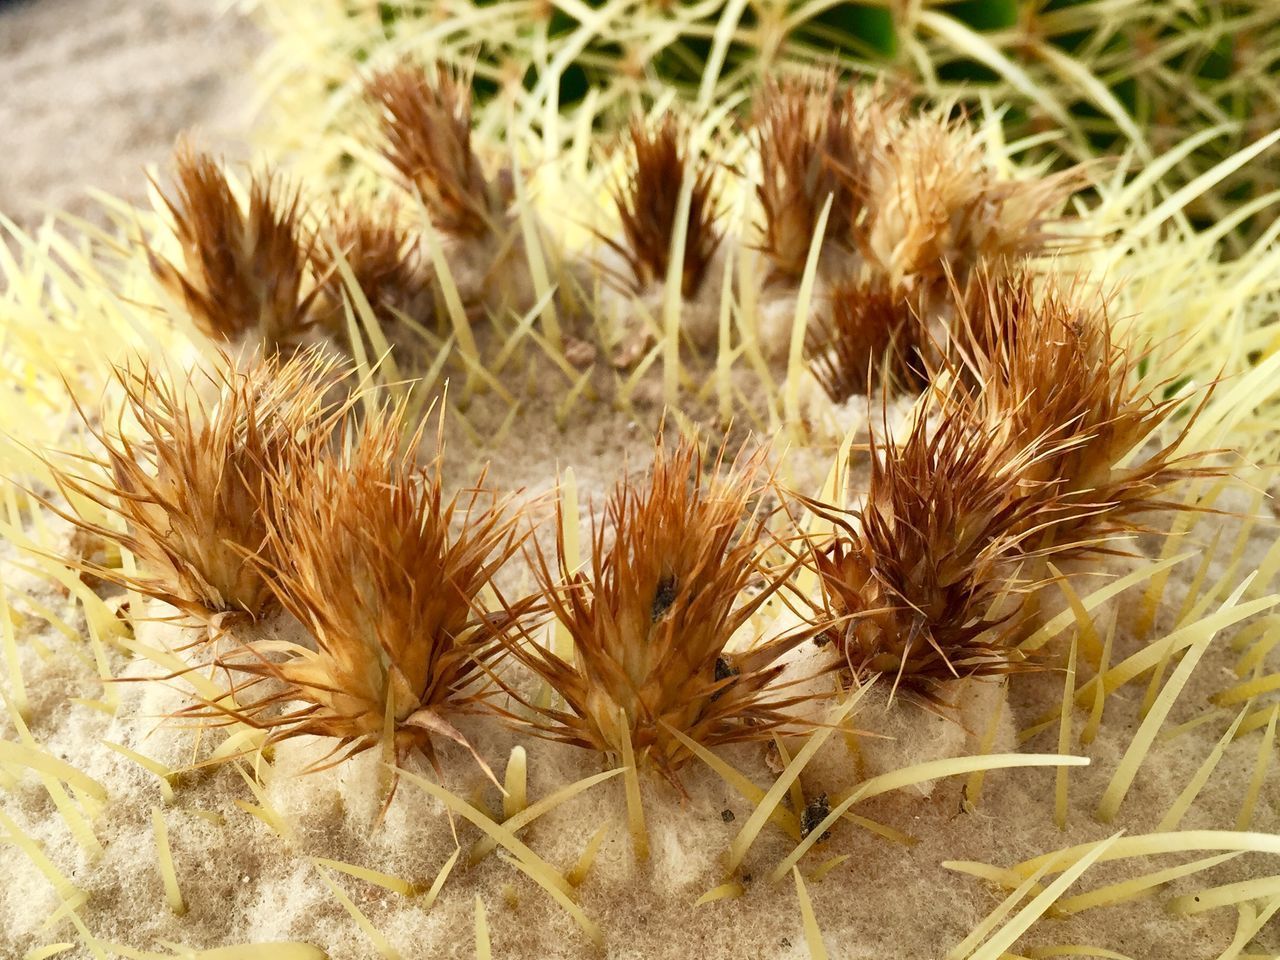 CLOSE-UP OF DRIED PLANT GROWING ON FIELD